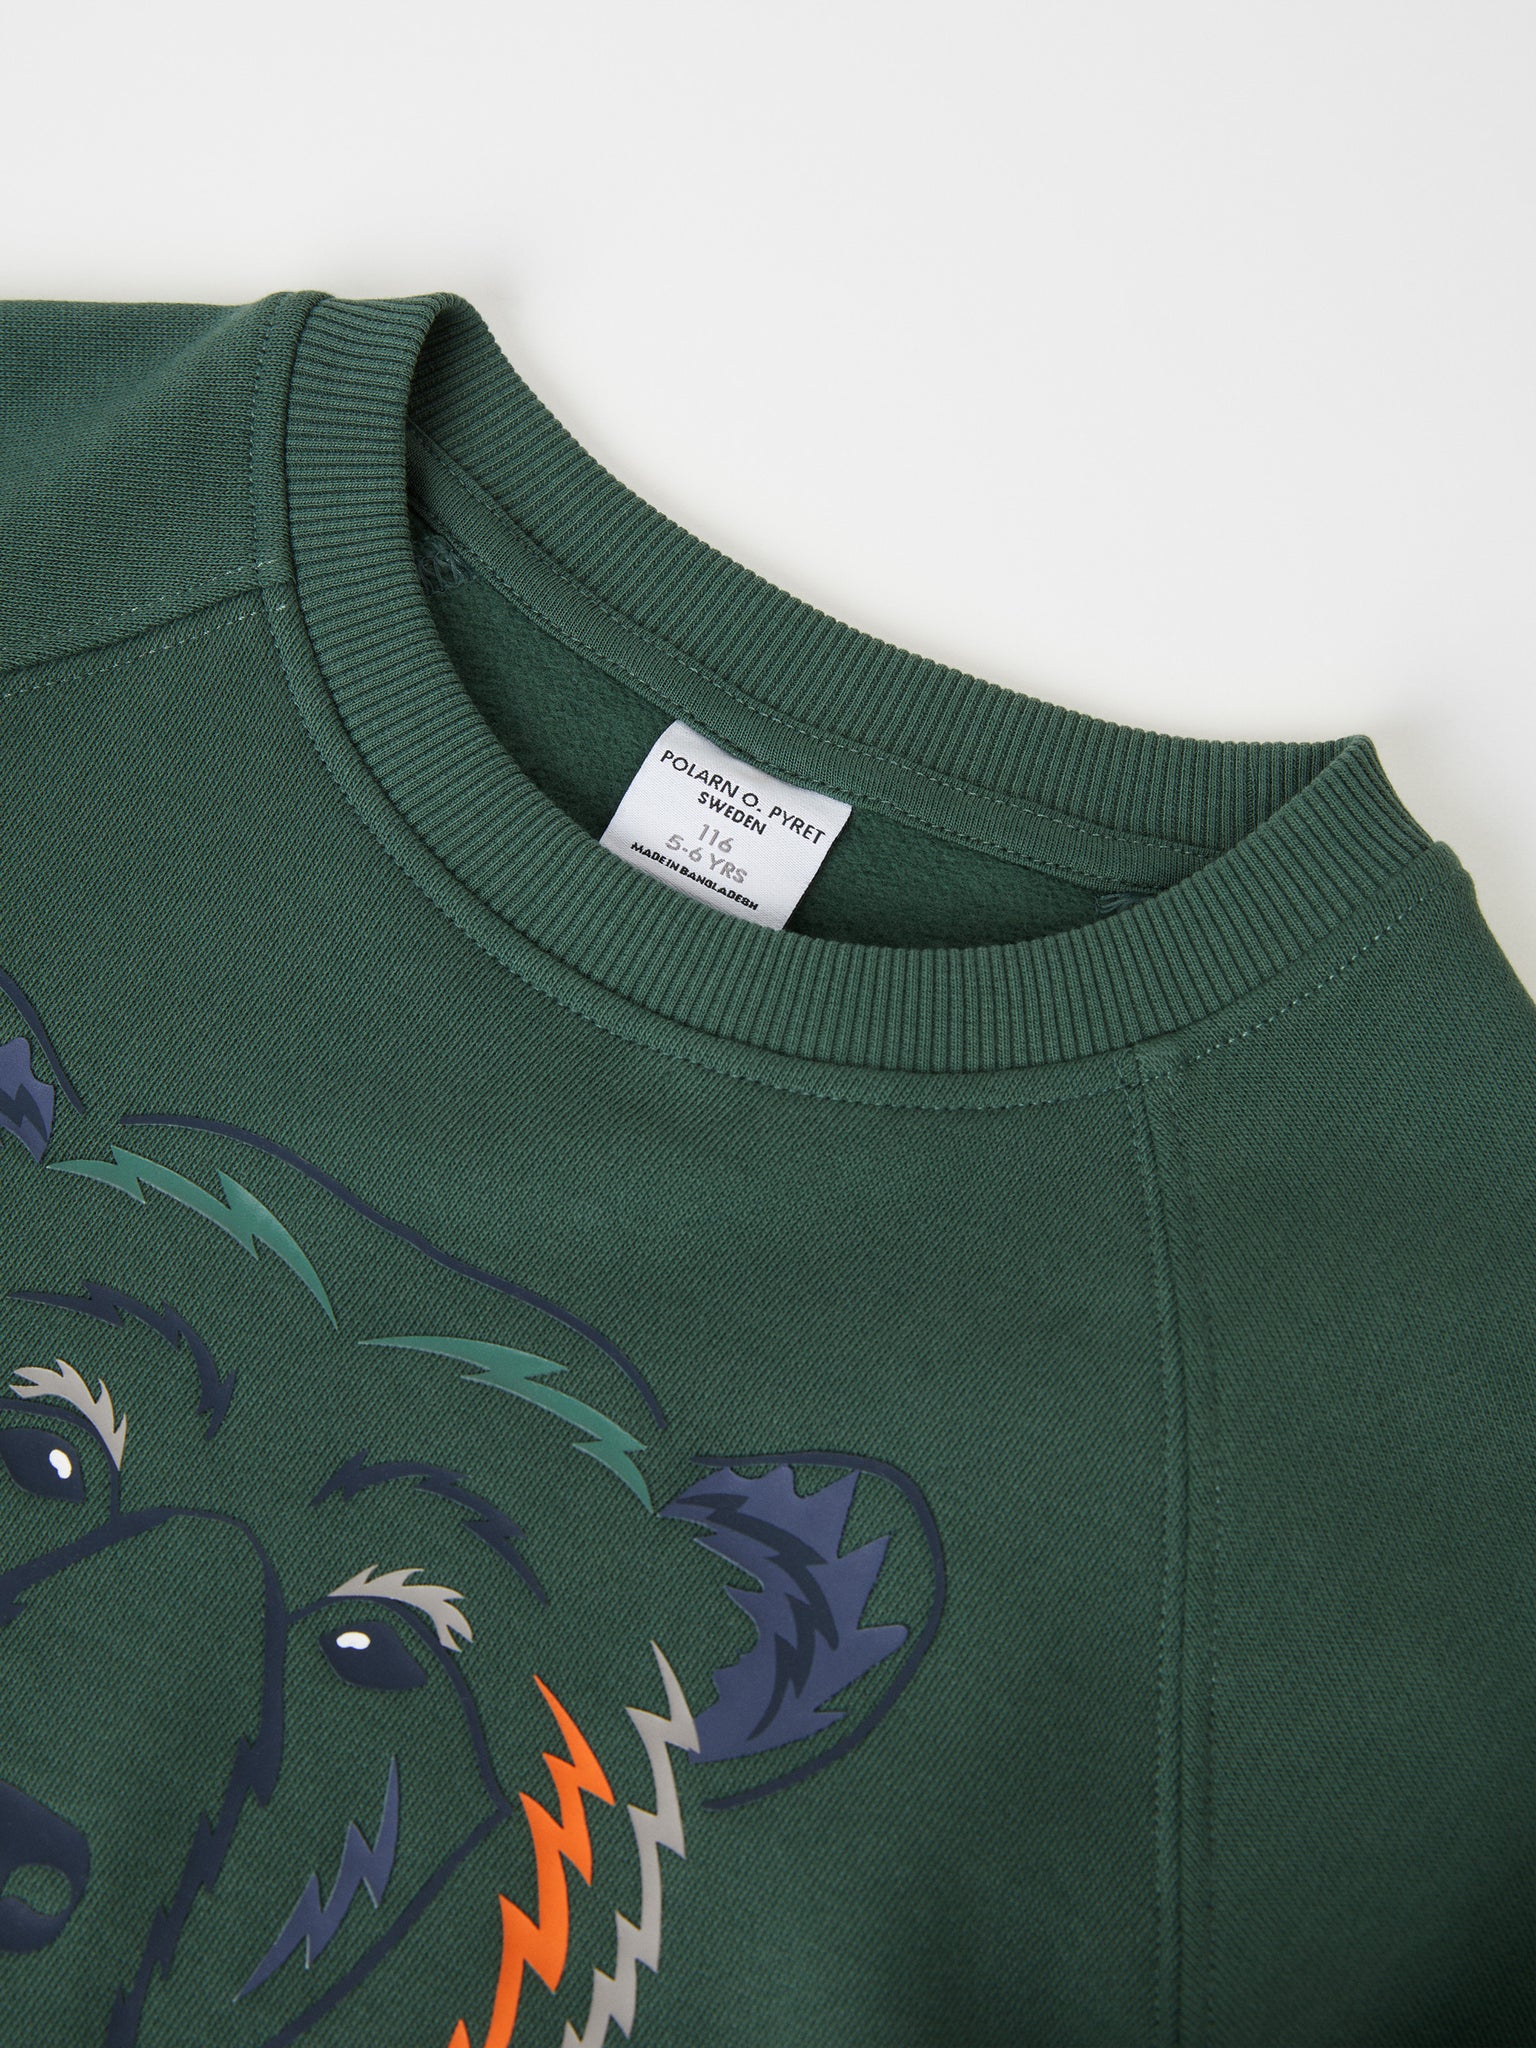 Bear Print Kids Green Sweatshirt from the Polarn O. Pyret kids collection. Clothes made using sustainably sourced materials.